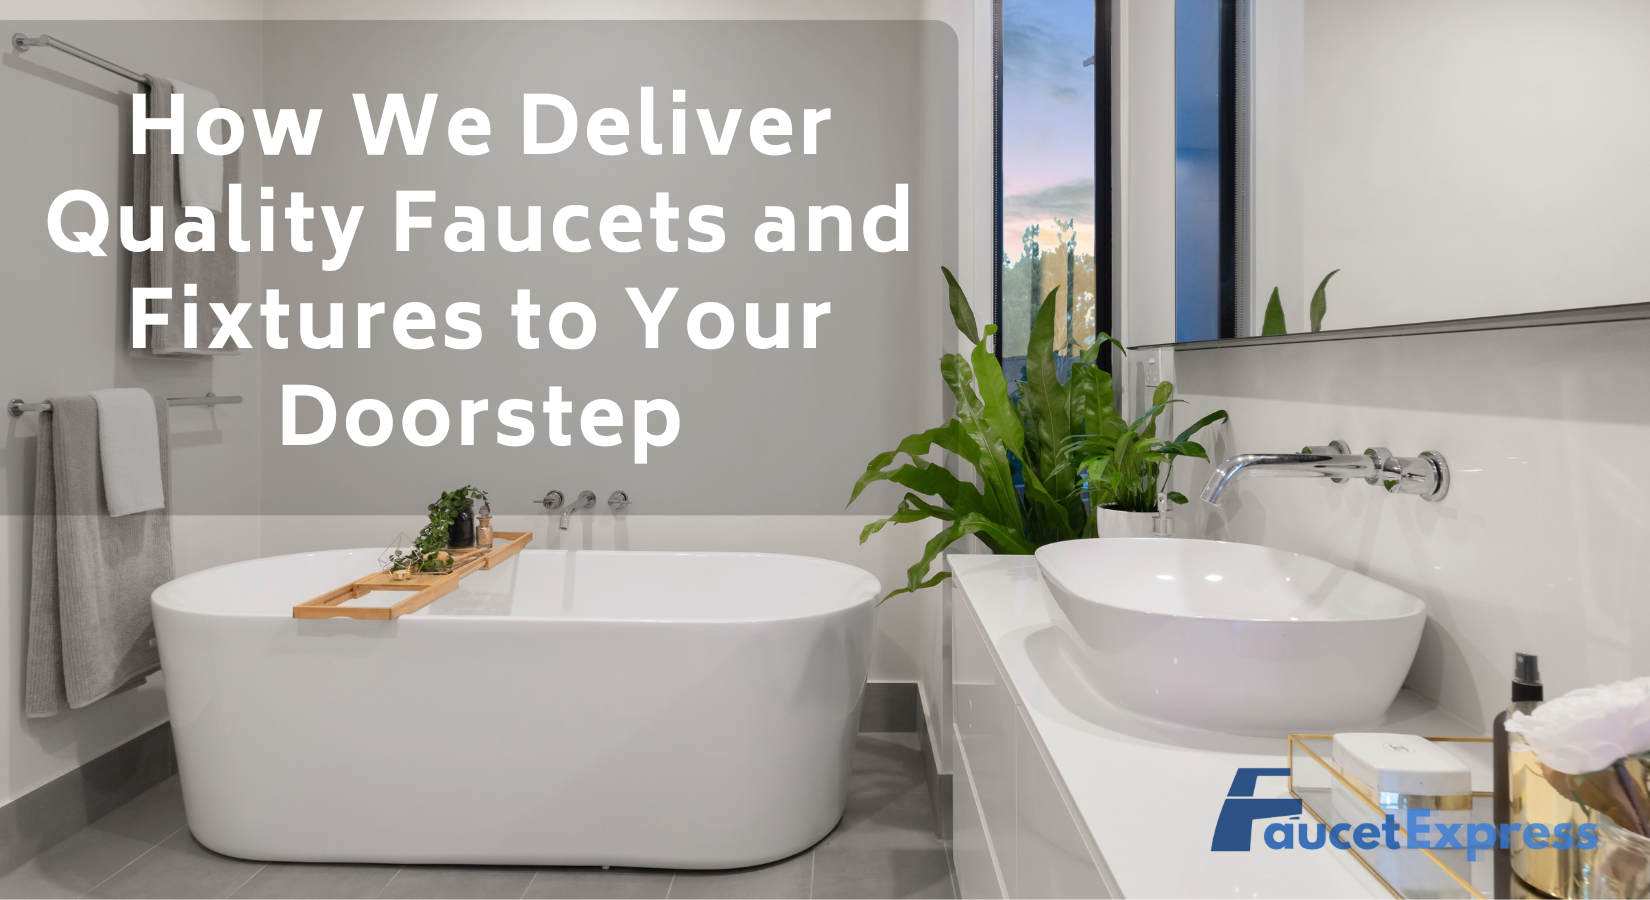 How We Deliver Quality Faucets and Fixtures to Your Doorstep